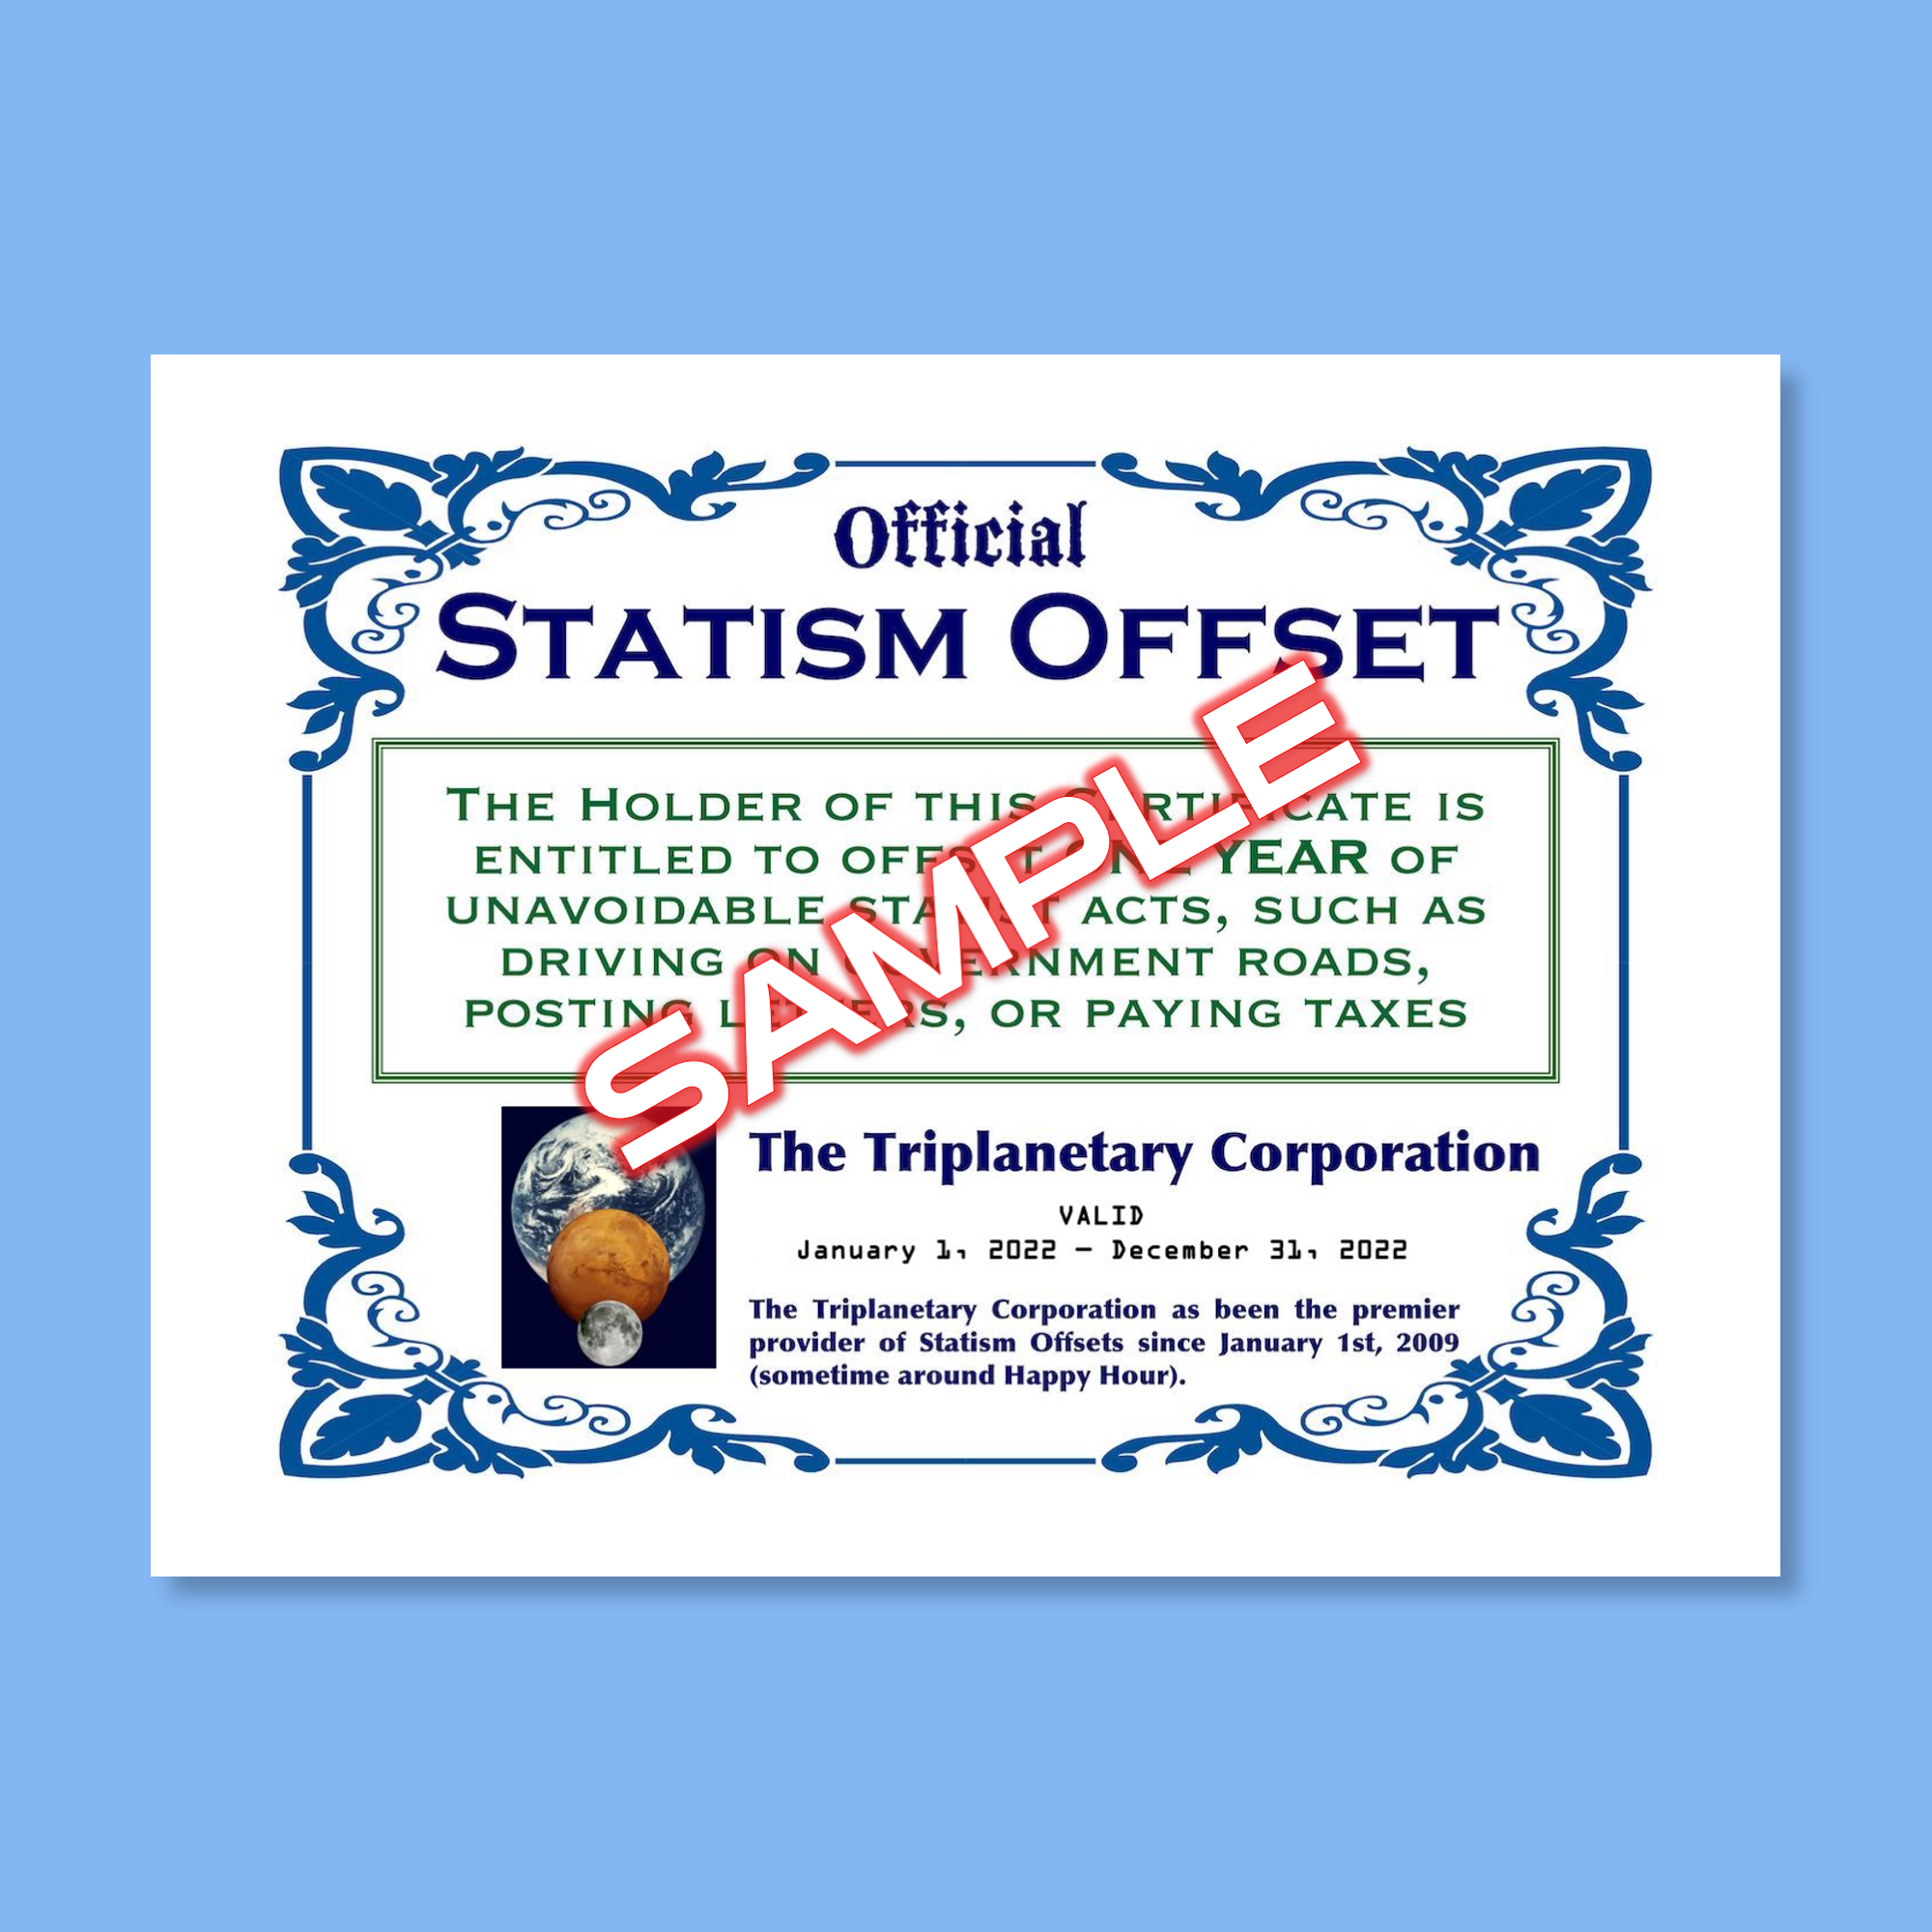 Blue-bordered image of 'Statism Offset' Certificate